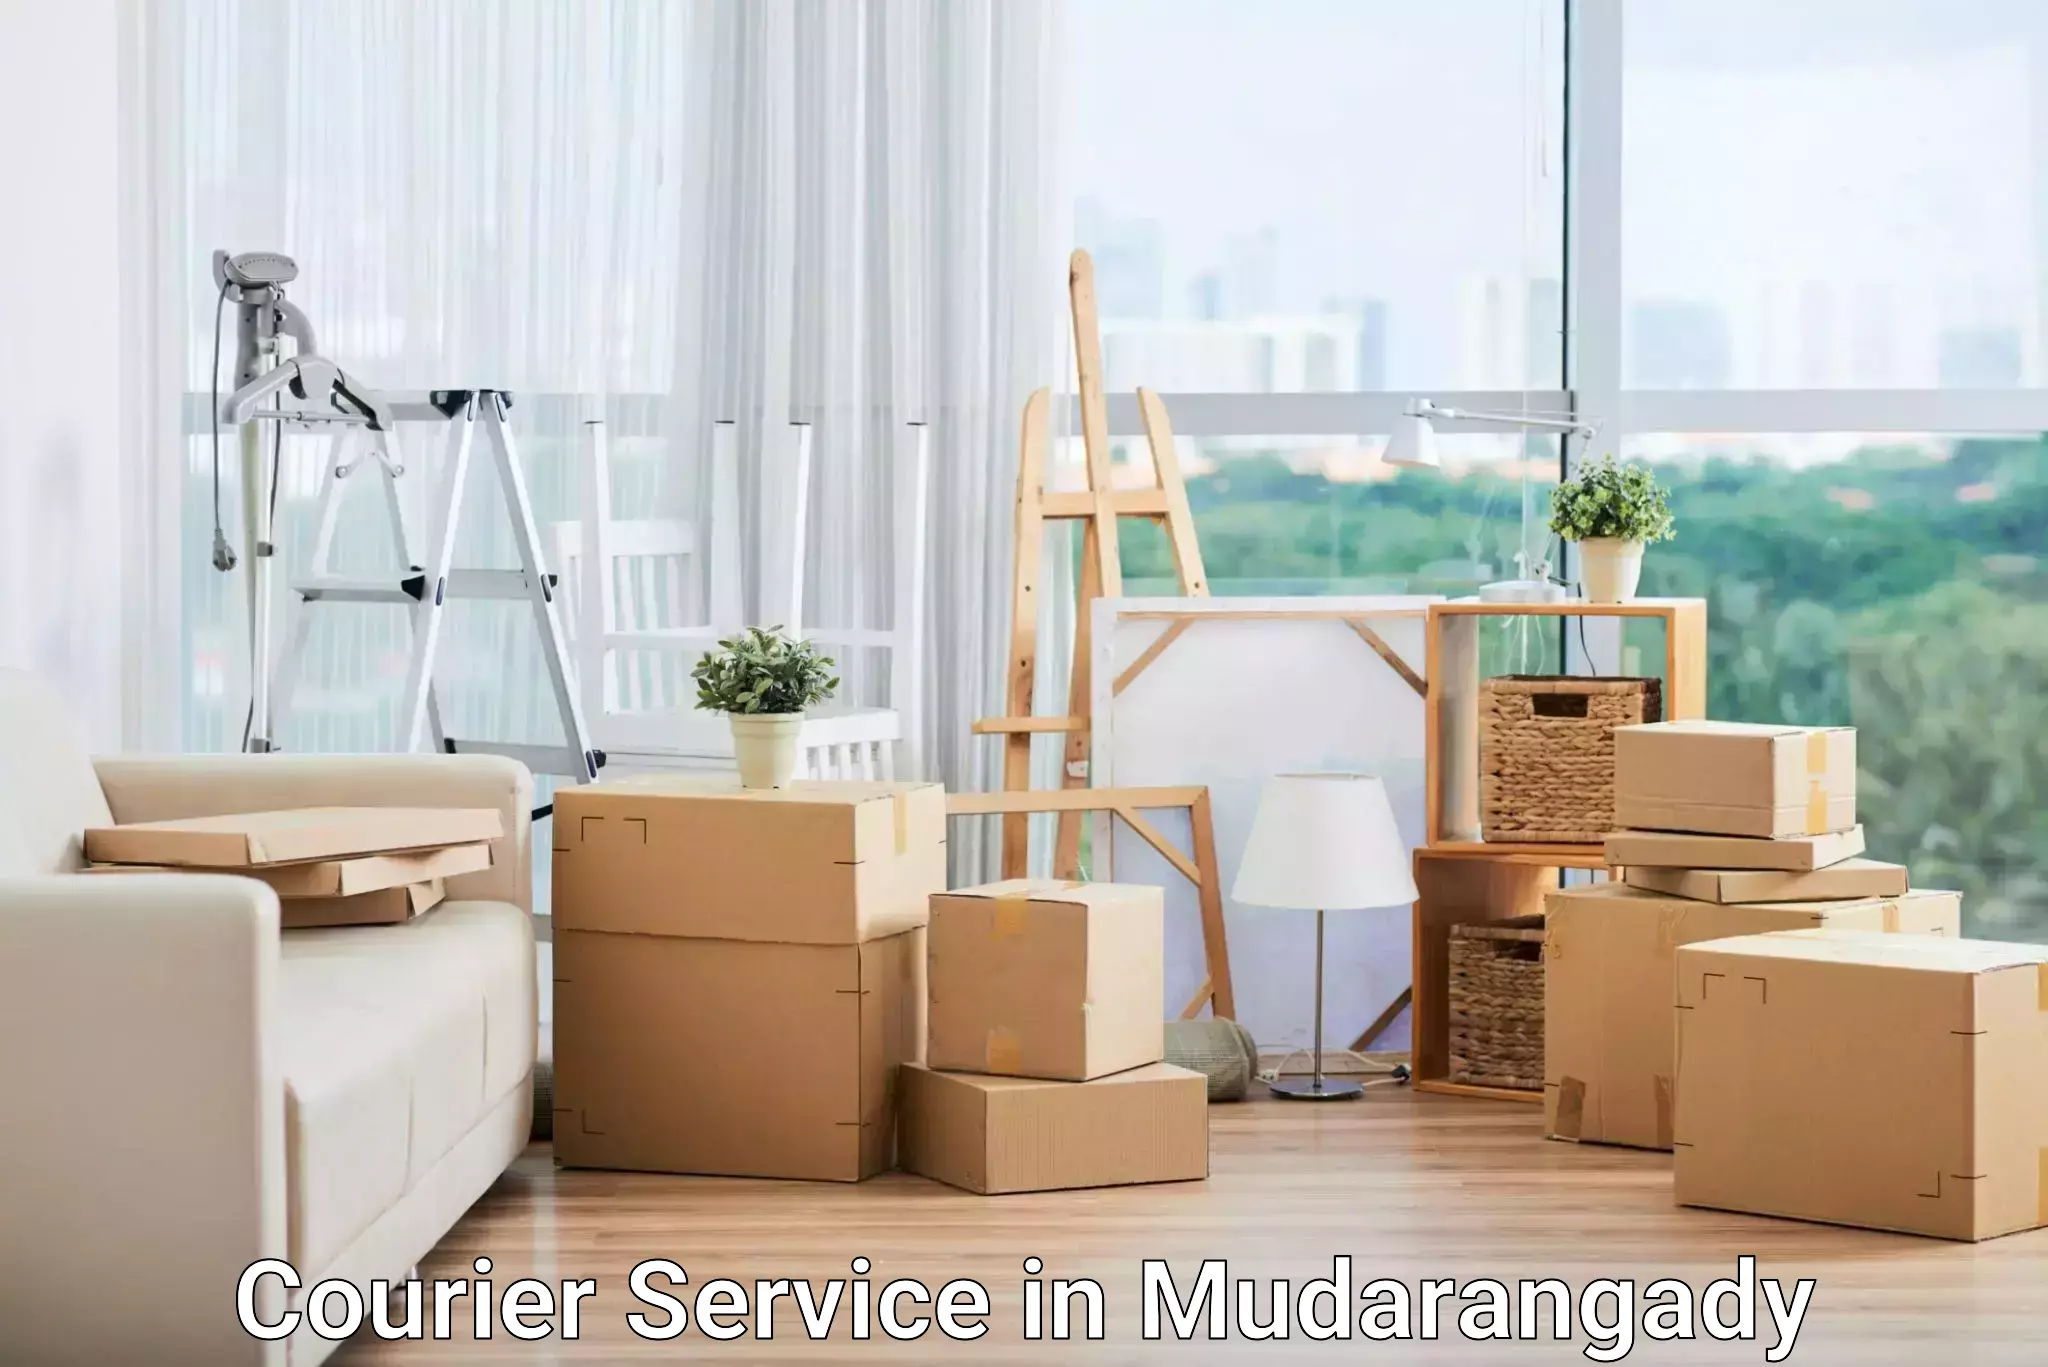 Same-day delivery solutions in Mudarangady